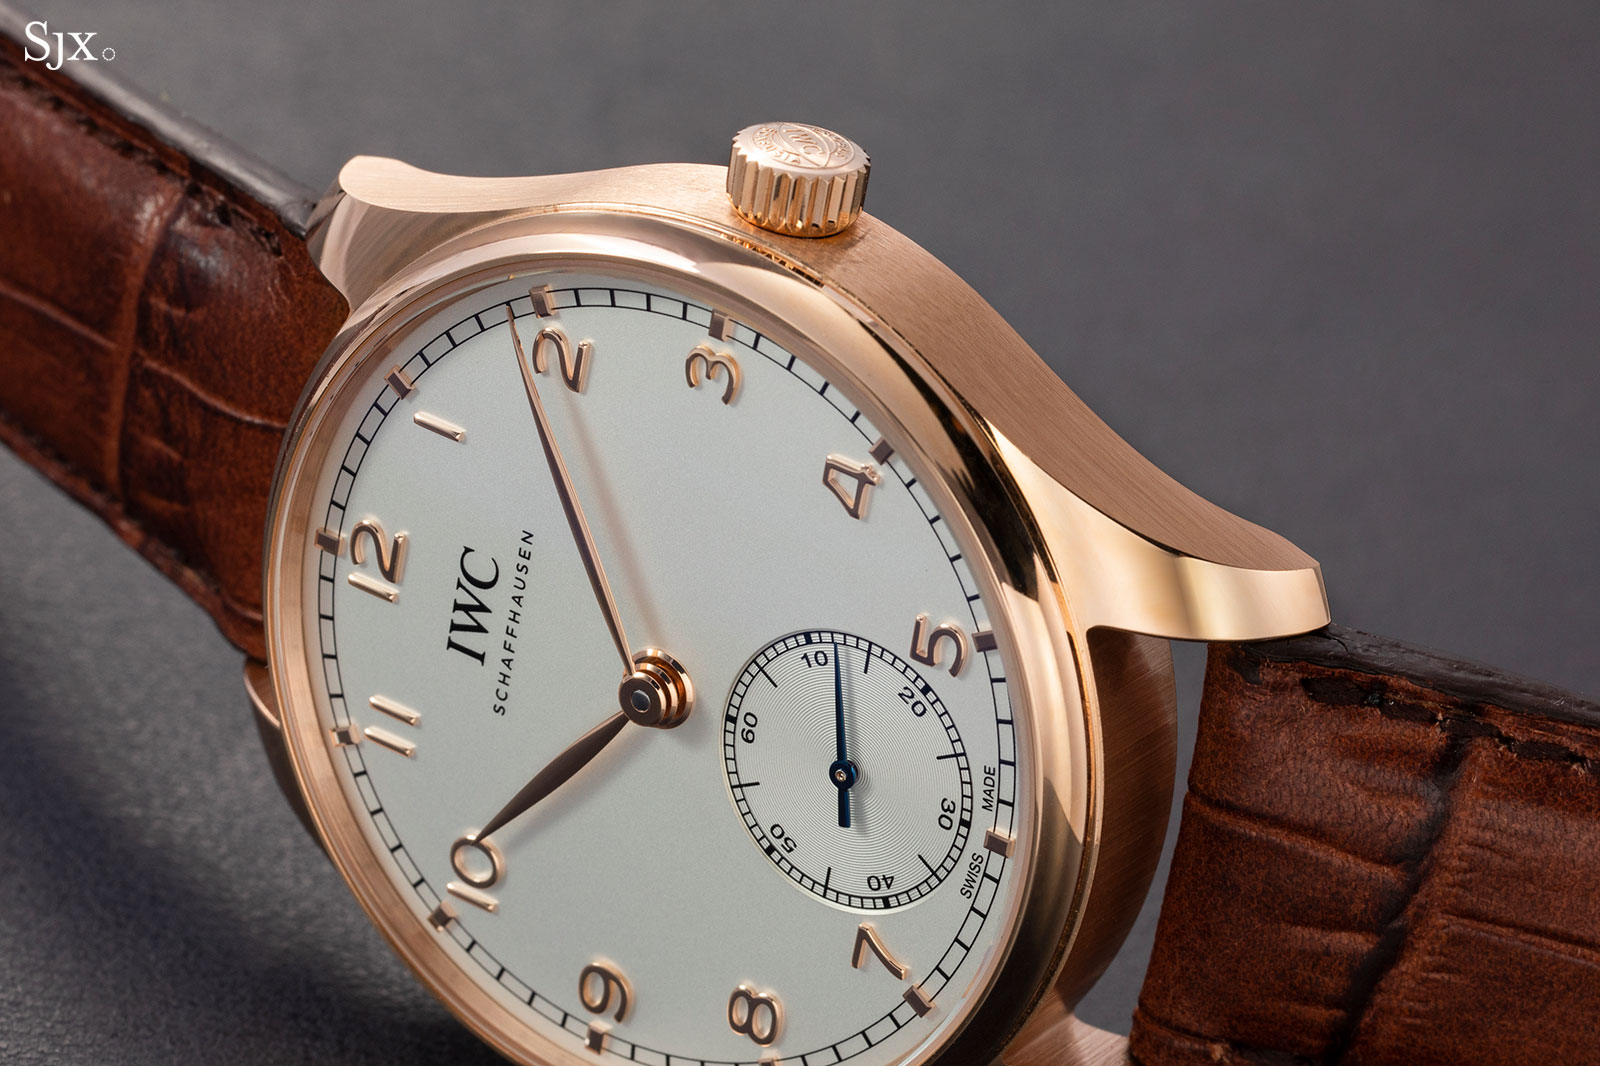 Iwc Portugieser Automatic Rose Gold | vlr.eng.br